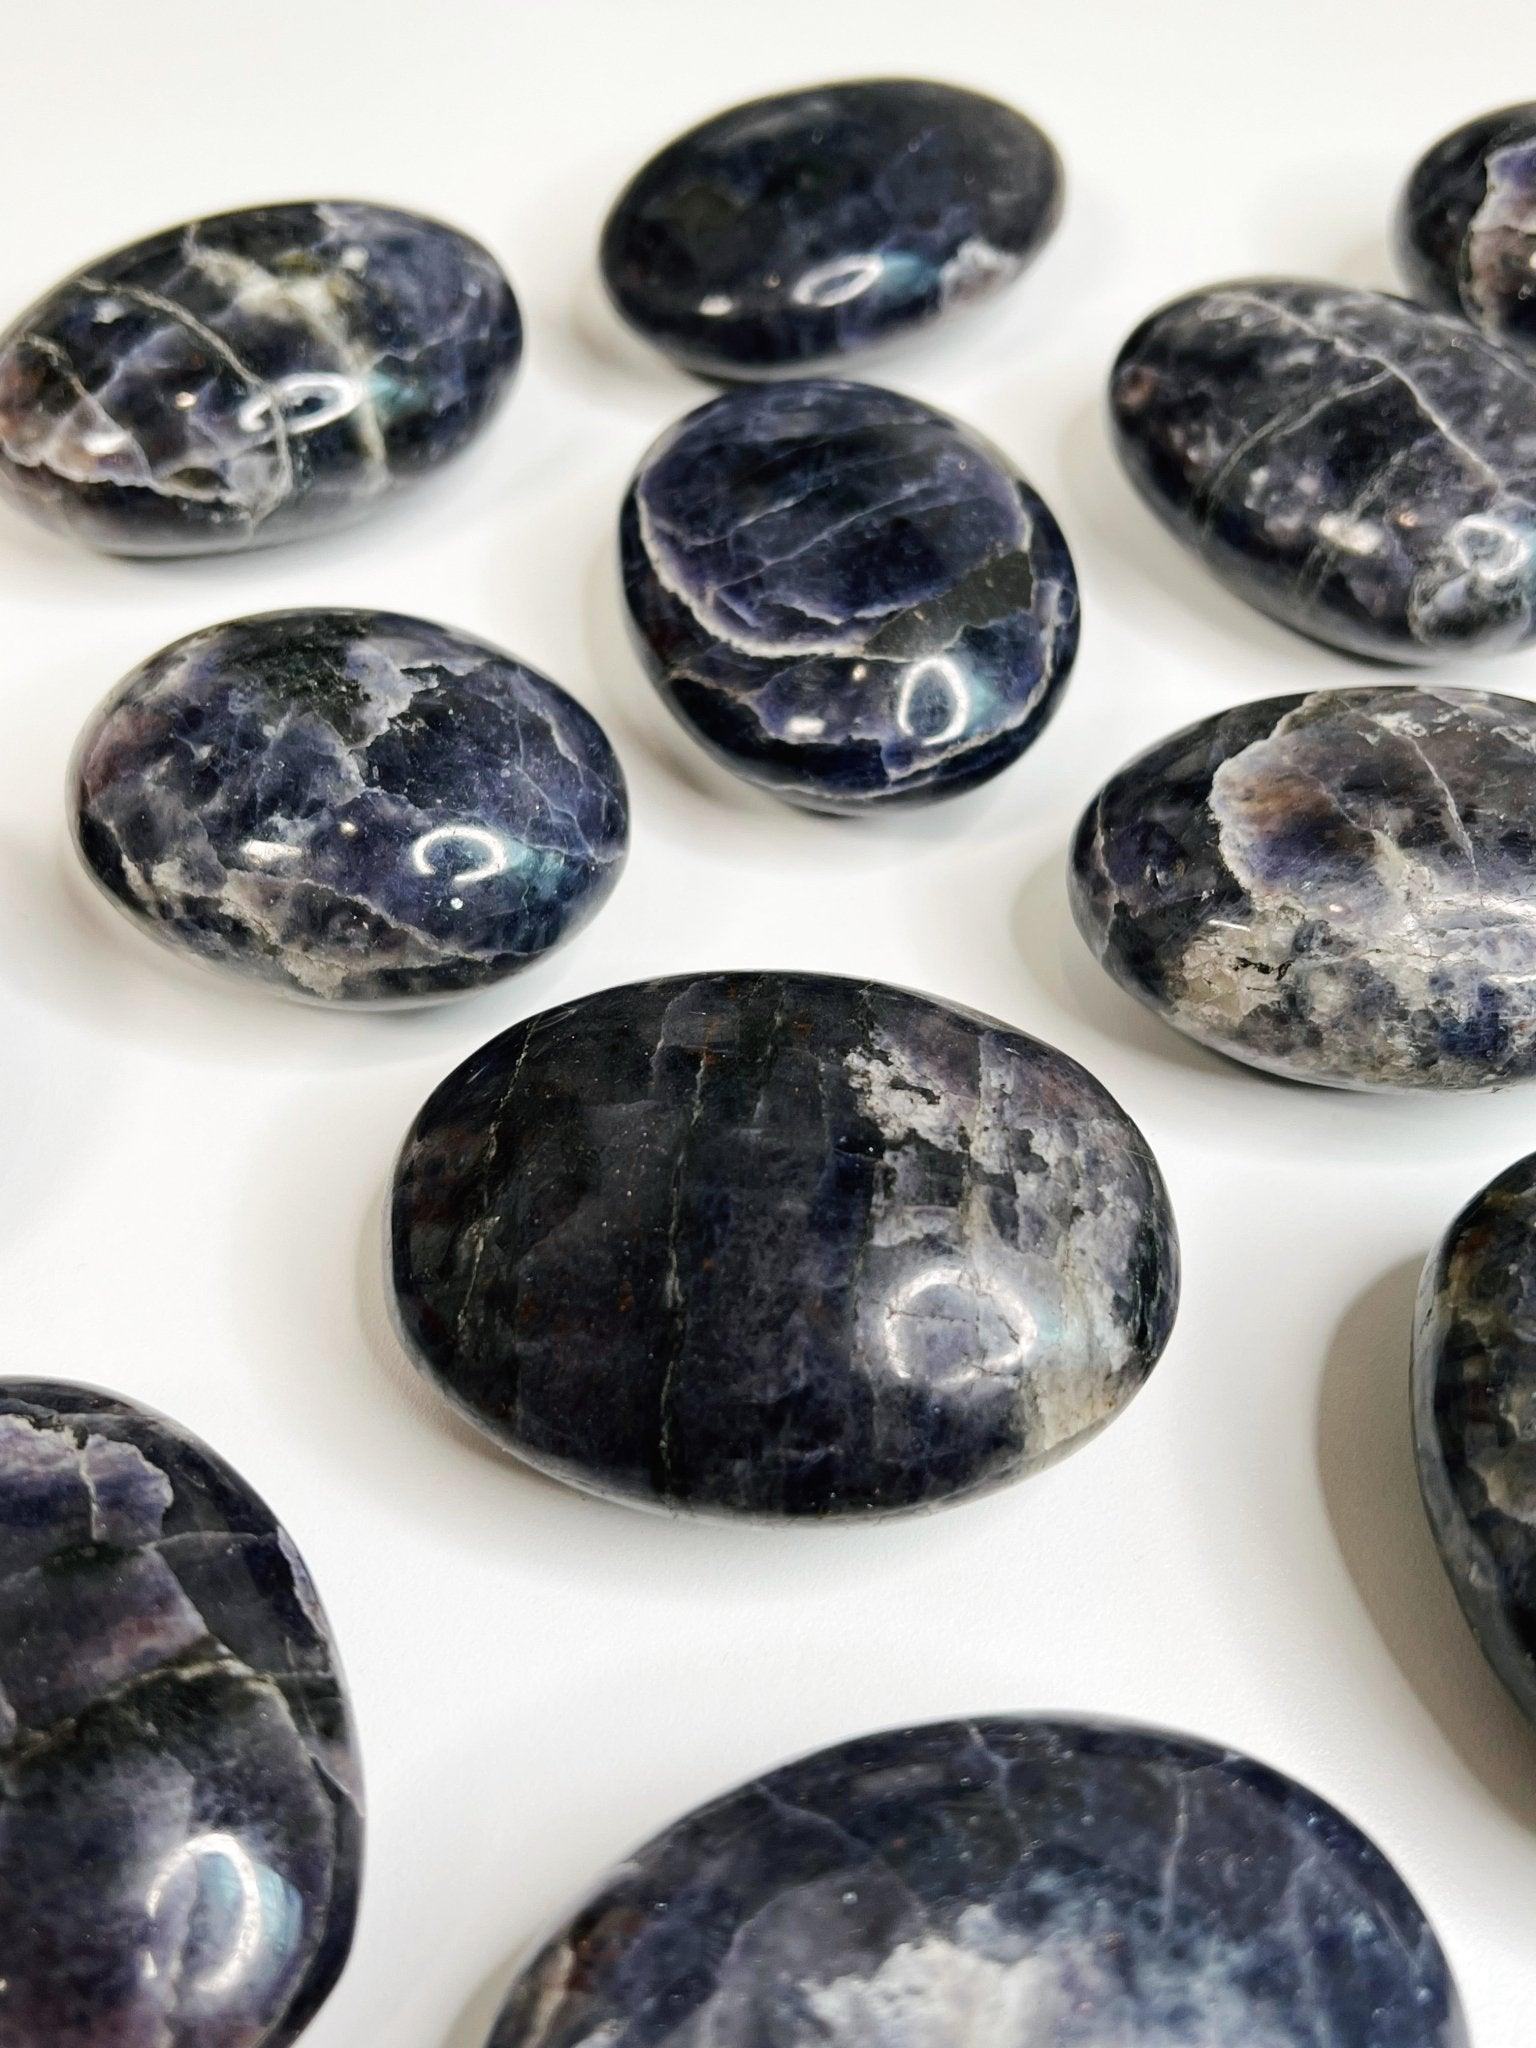 IOLITE PALM STONE - 33 bday, 444 sale, end of year sale, grief gift bundle, holiday sale, iolite, new year sale, palm stone, palmstone, tucson update - The Mineral Maven